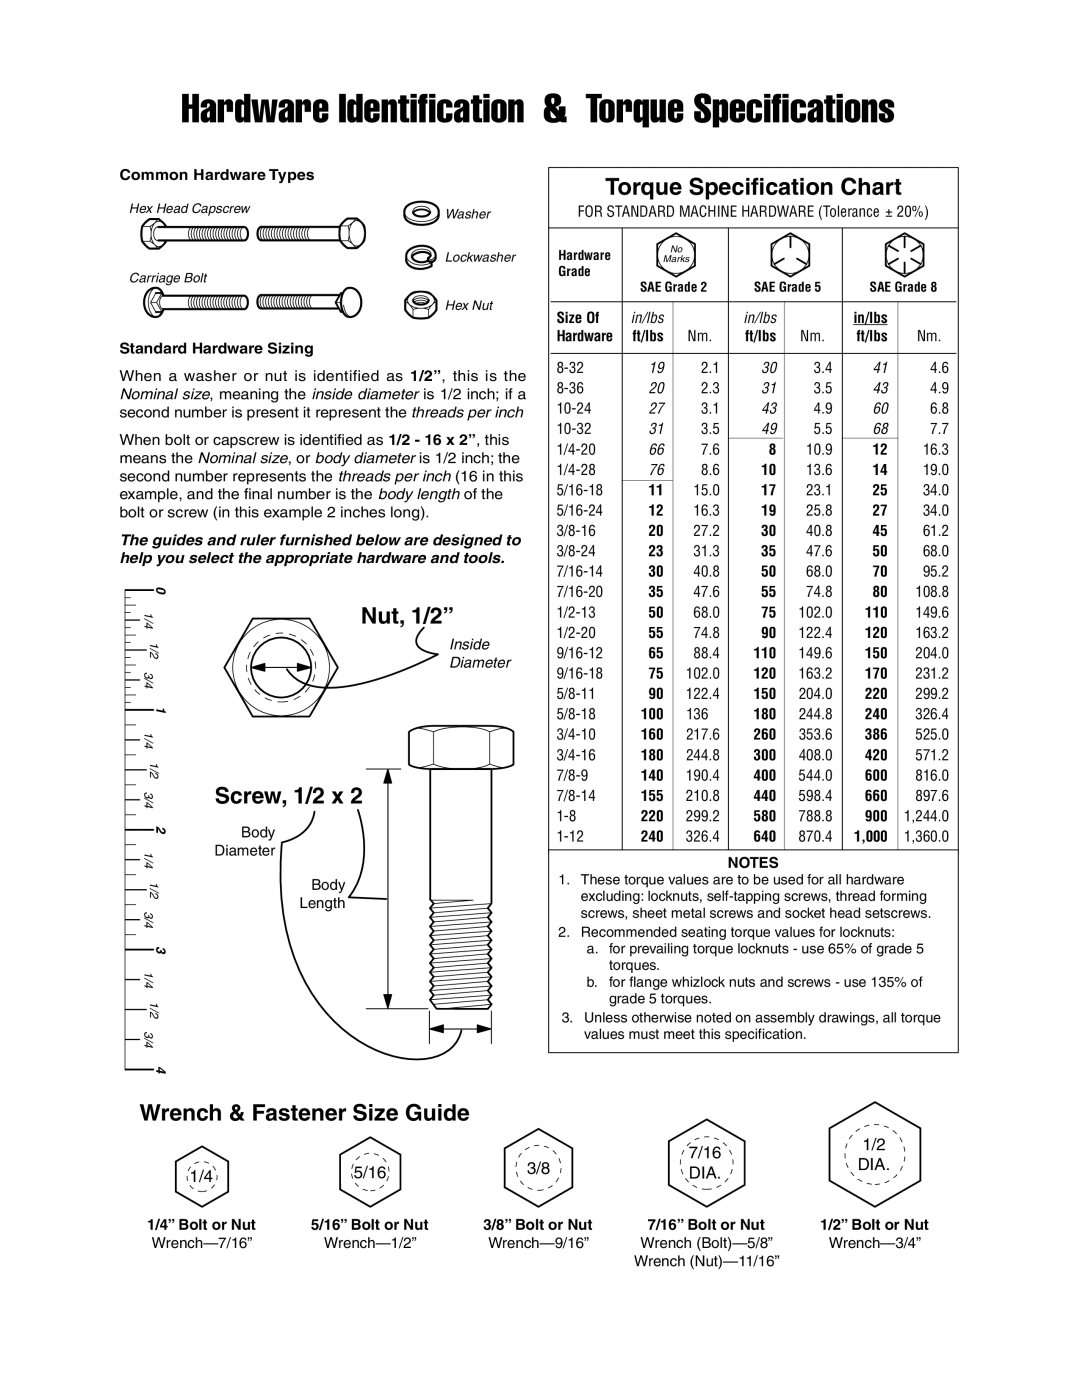 Snapper 4562 Wrench & Fastener Size Guide, Hardware Identification & Torque Specifications, Torque Specification Chart 